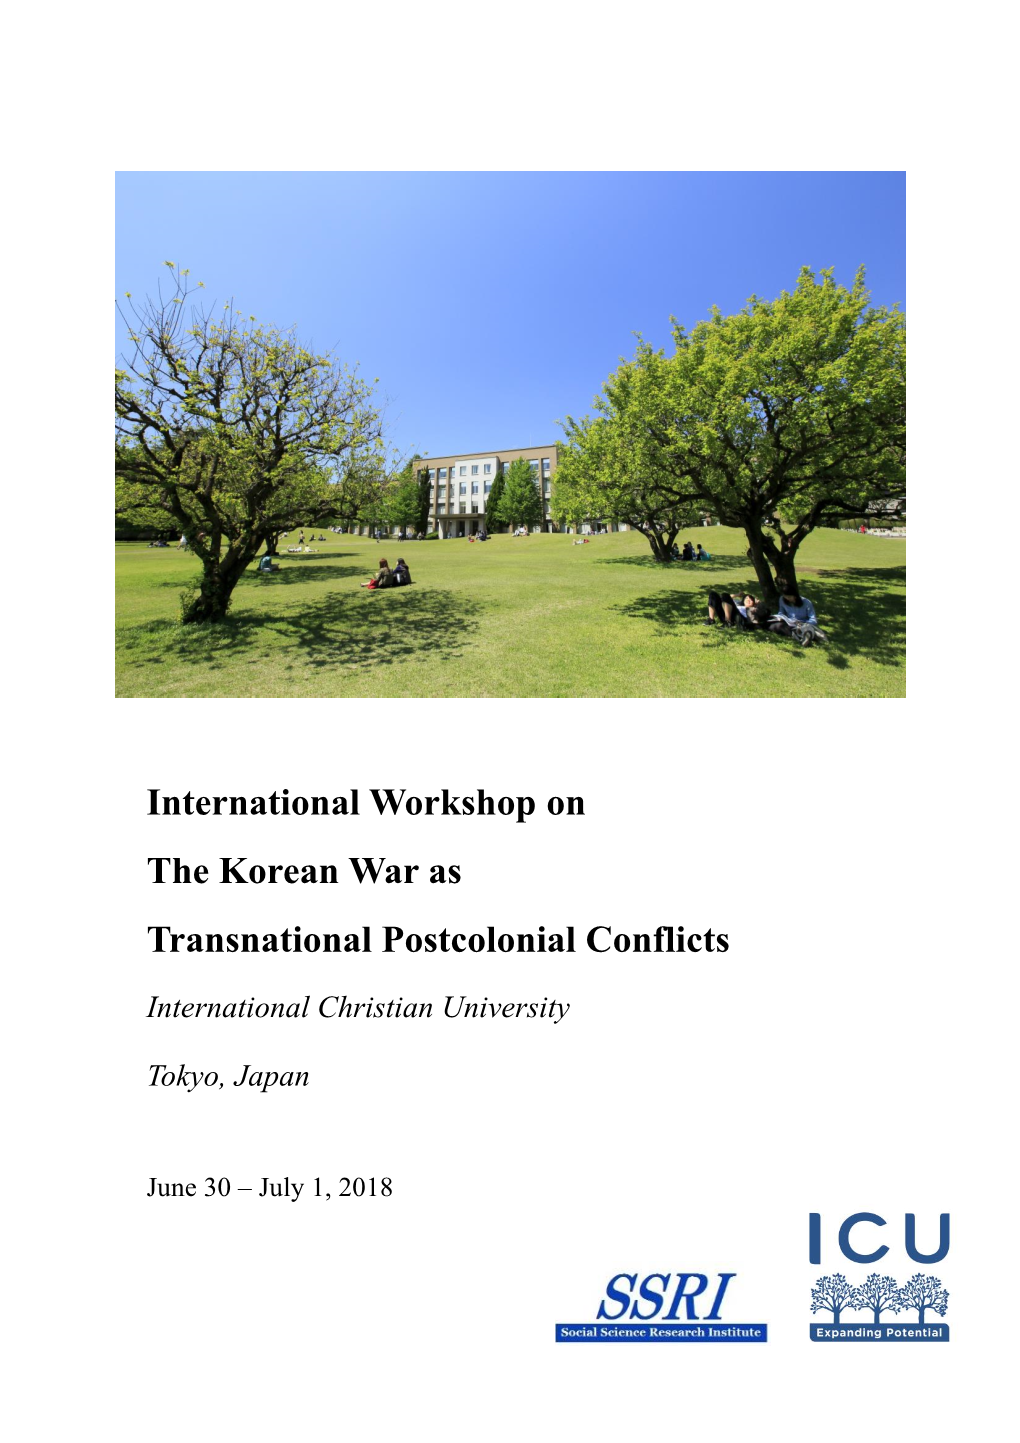 International Workshop on the Korean War As Transnational Postcolonial Conflicts